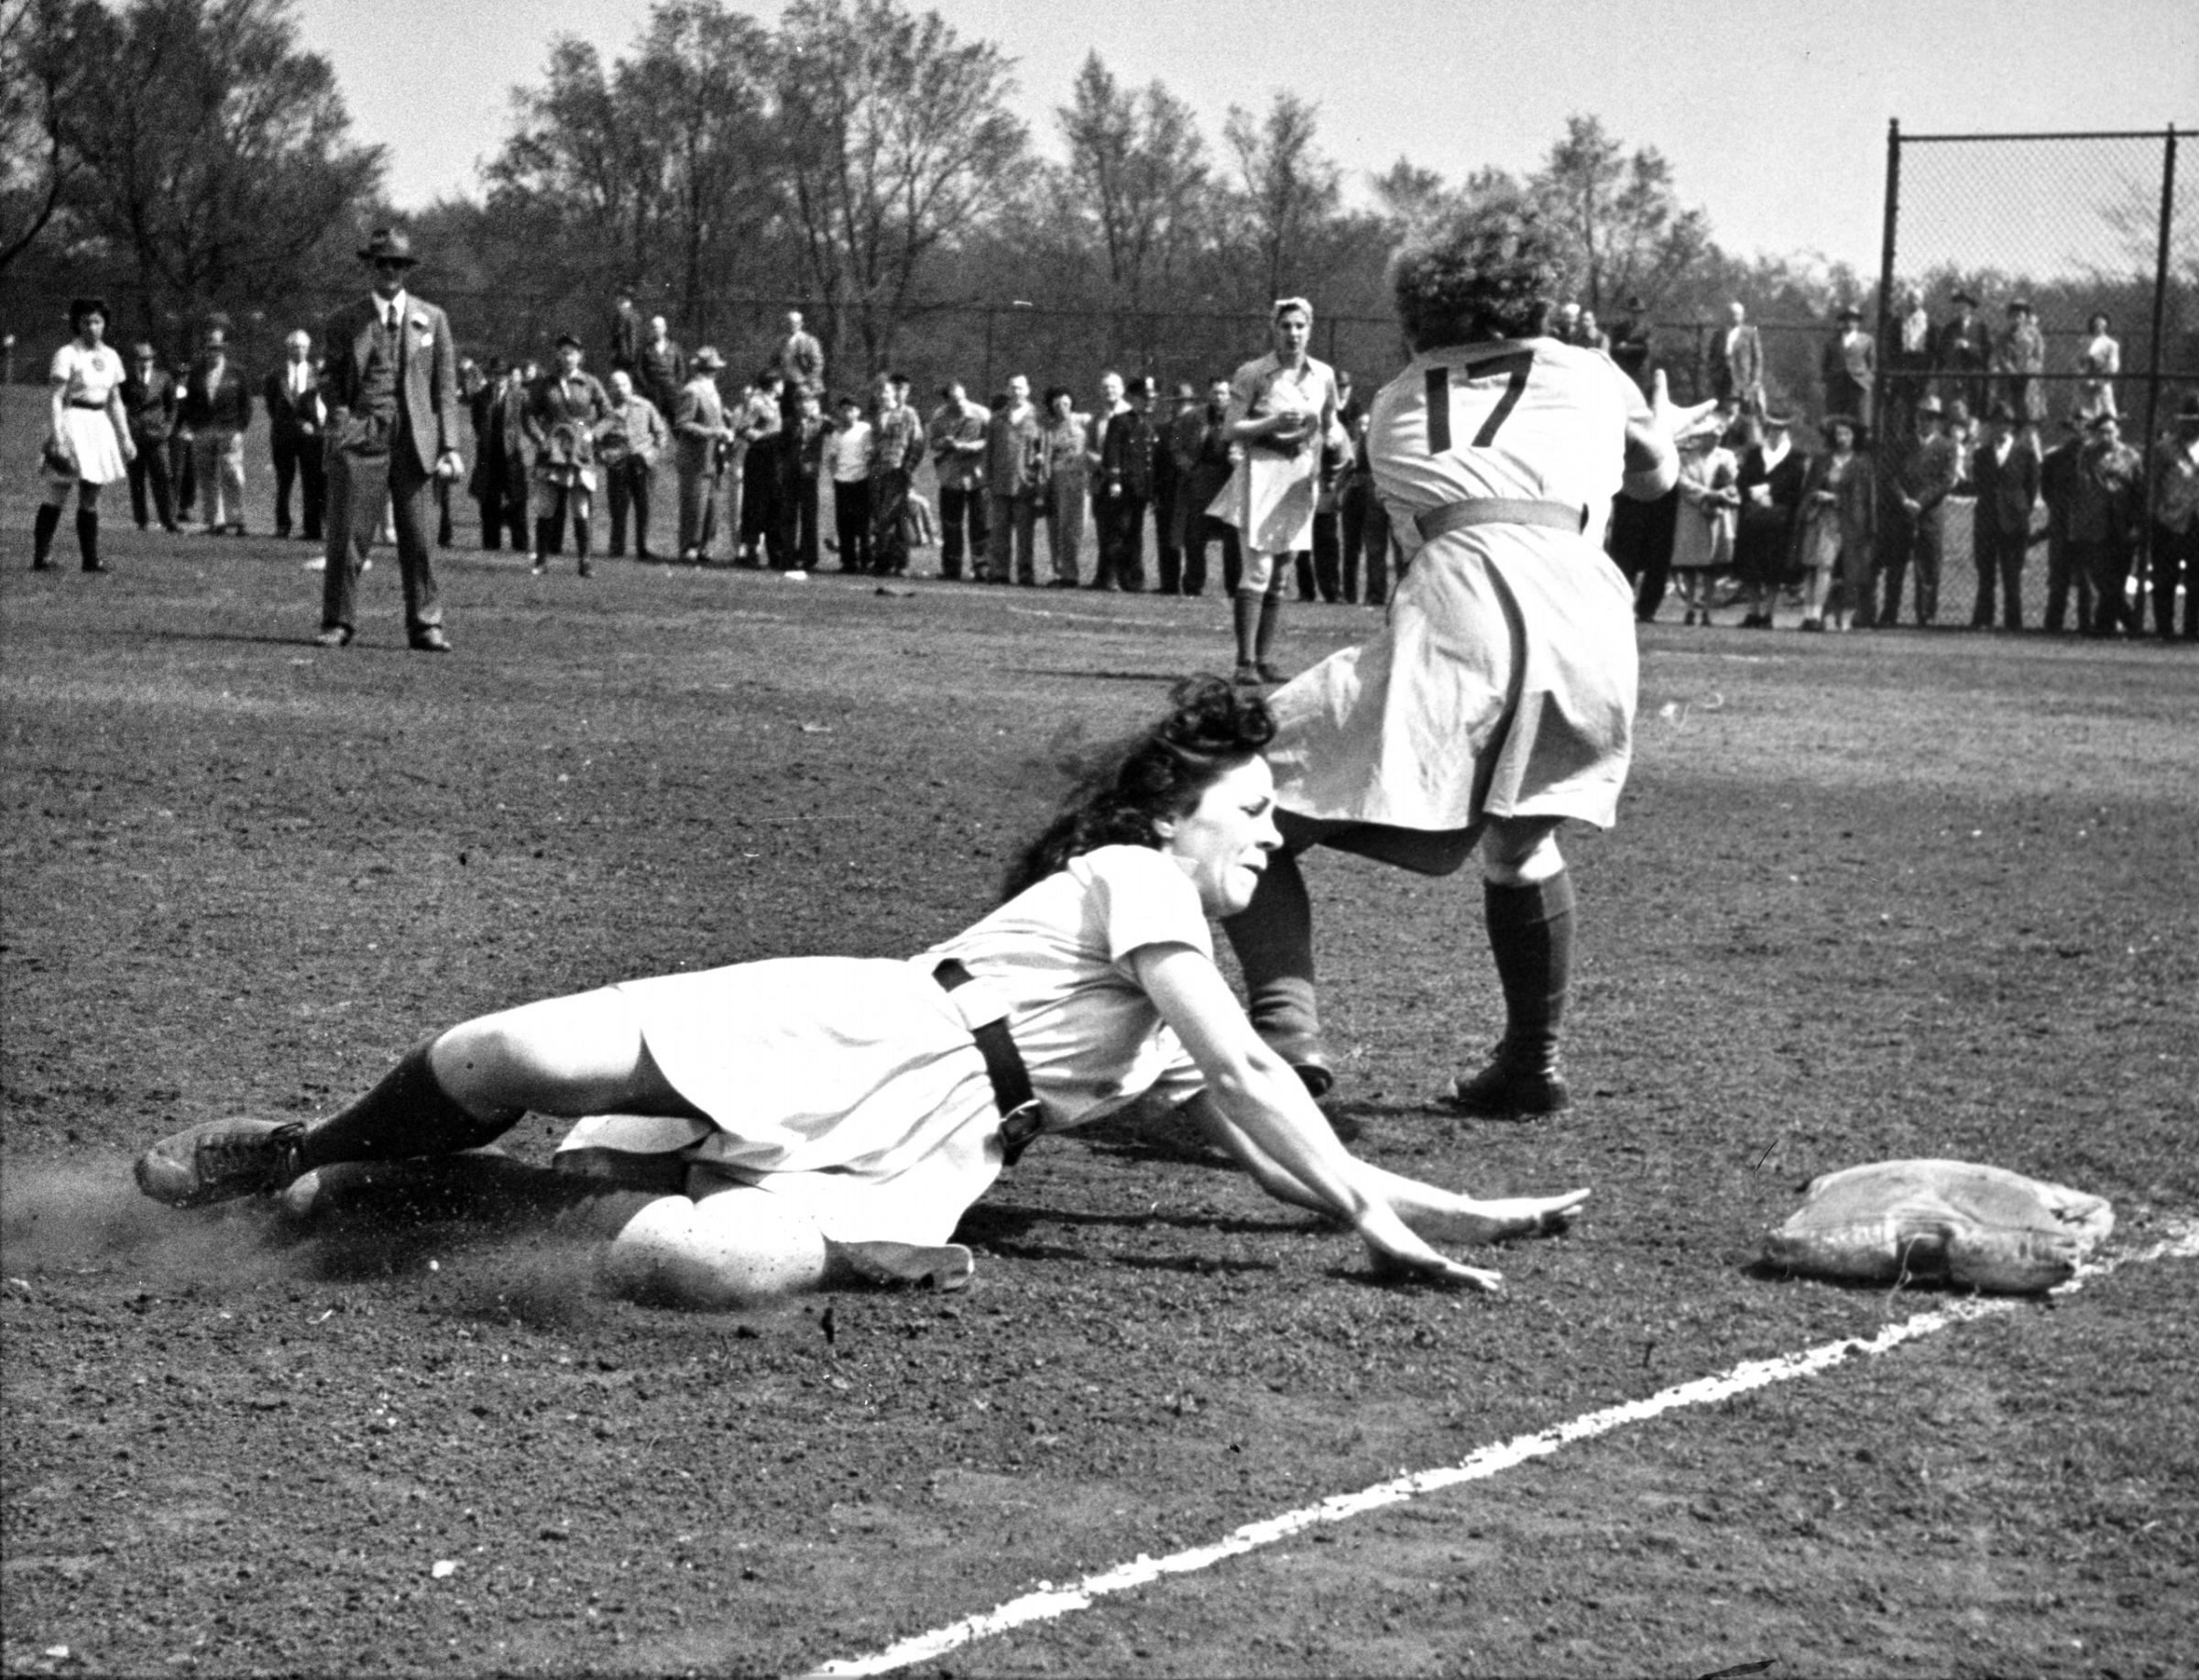 Penny O'Brian, Fort Wayne rookie infielder slides into third base. Sliding and bare legs are incompatible but girls do it regularly in their enthusiasm.